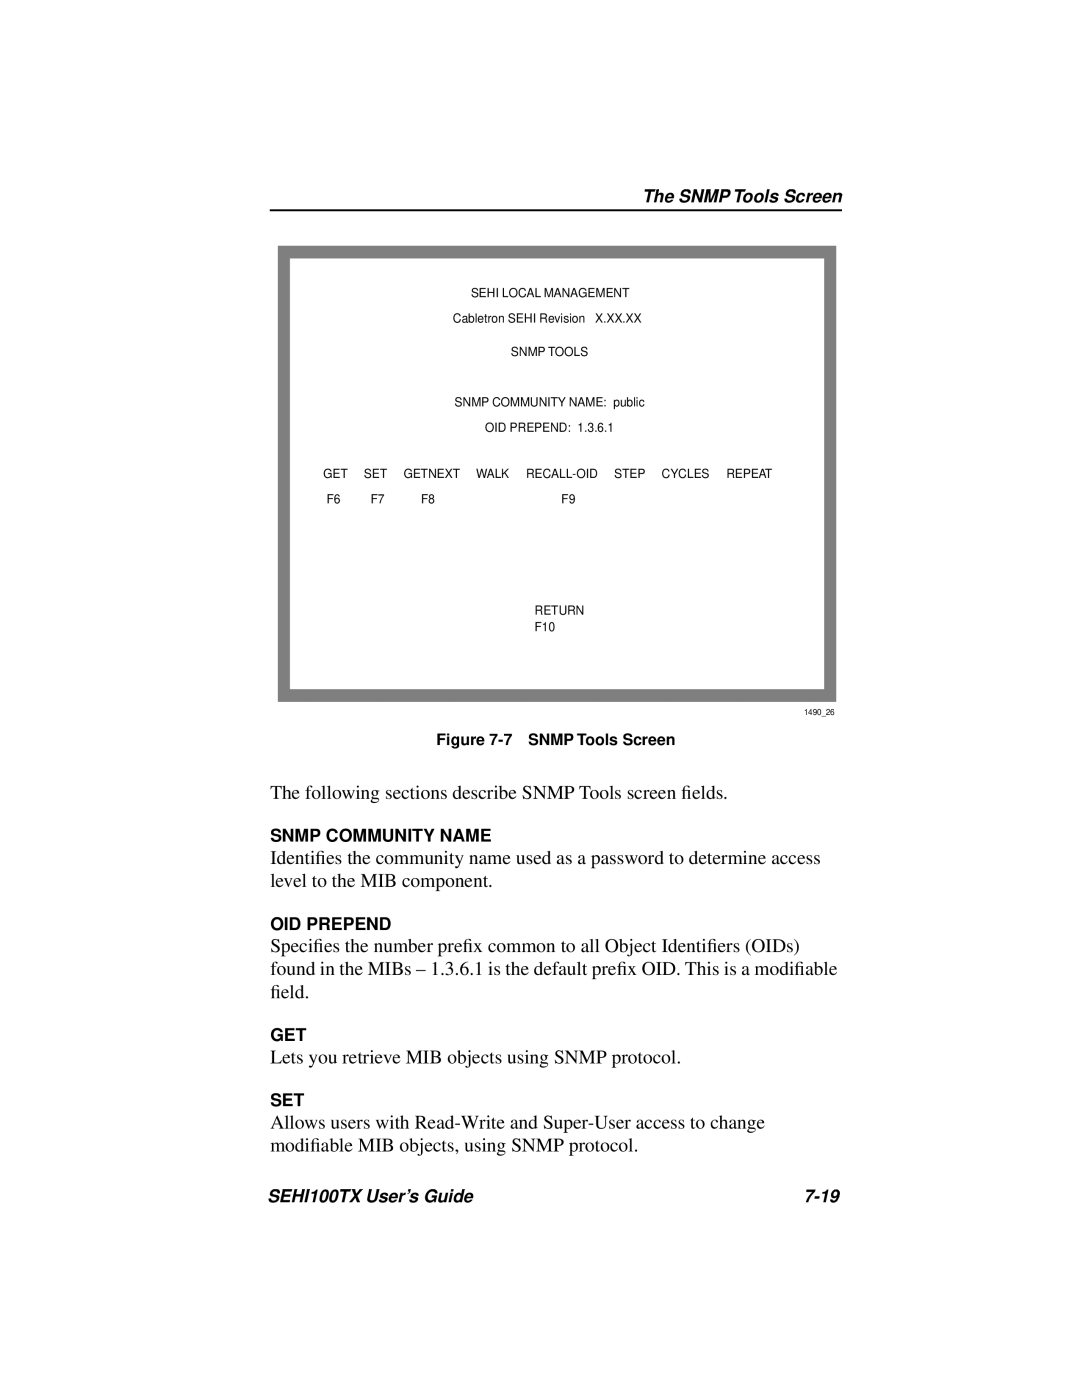 Cabletron Systems SEHI100TX-22 manual The following sections describe SNMP Tools screen ﬁelds 